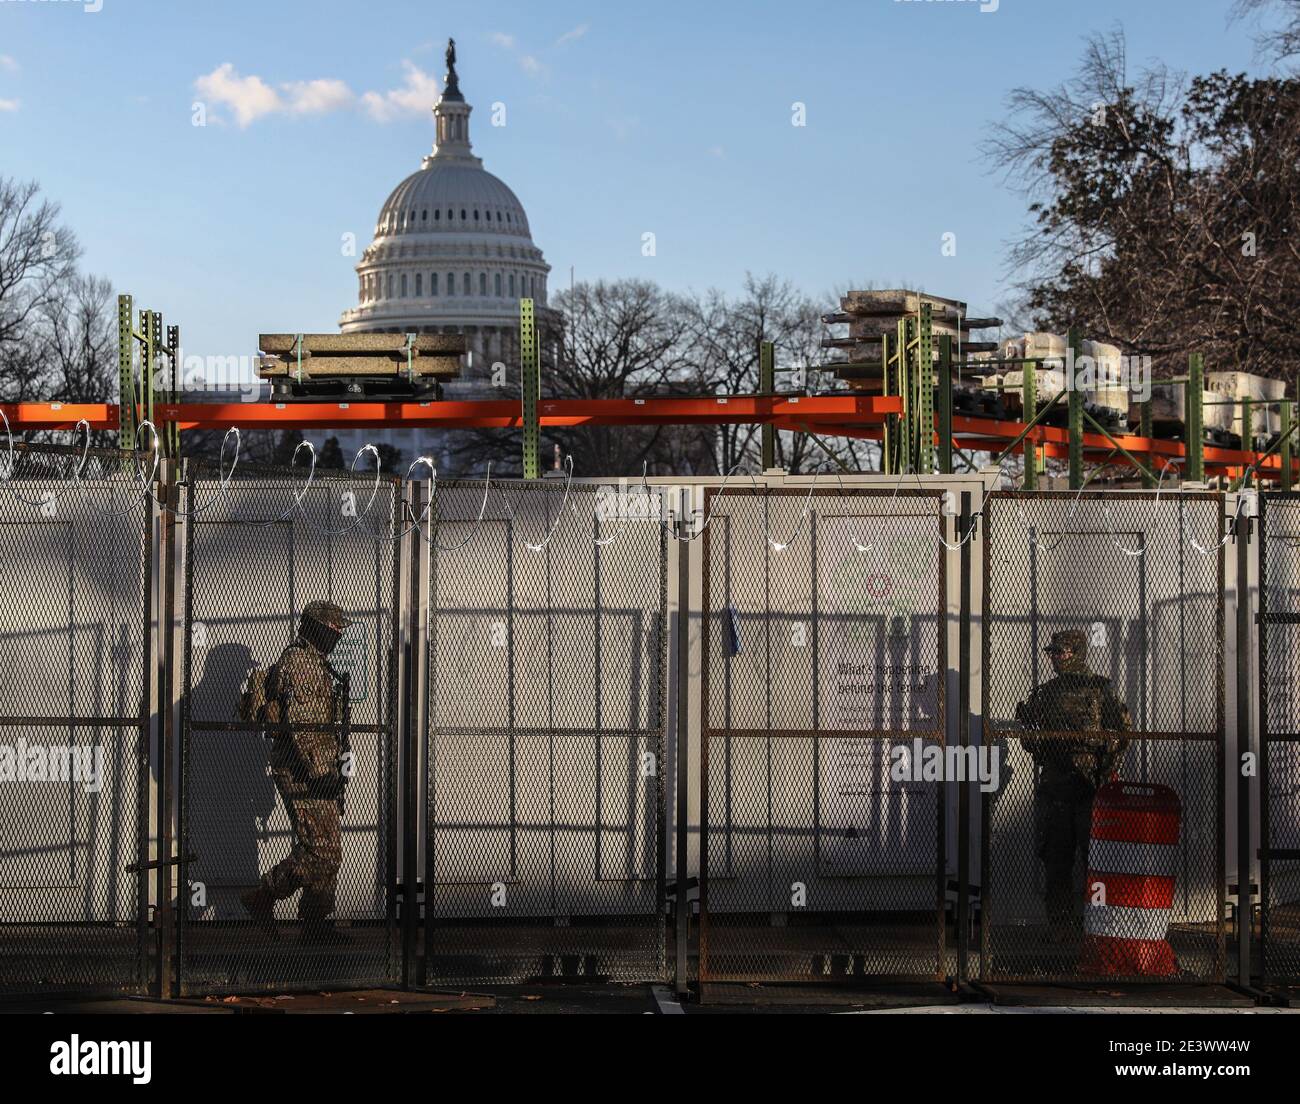 Washington, DC, United States. 20th Jan, 2021. National Guardsman get into position outside of the US Capitol prior to the inauguration of Joe Biden as the 46th President of the United States on Wednesday January 20, 2021. Photo by Jemal Countess/UPI Credit: UPI/Alamy Live News Stock Photo